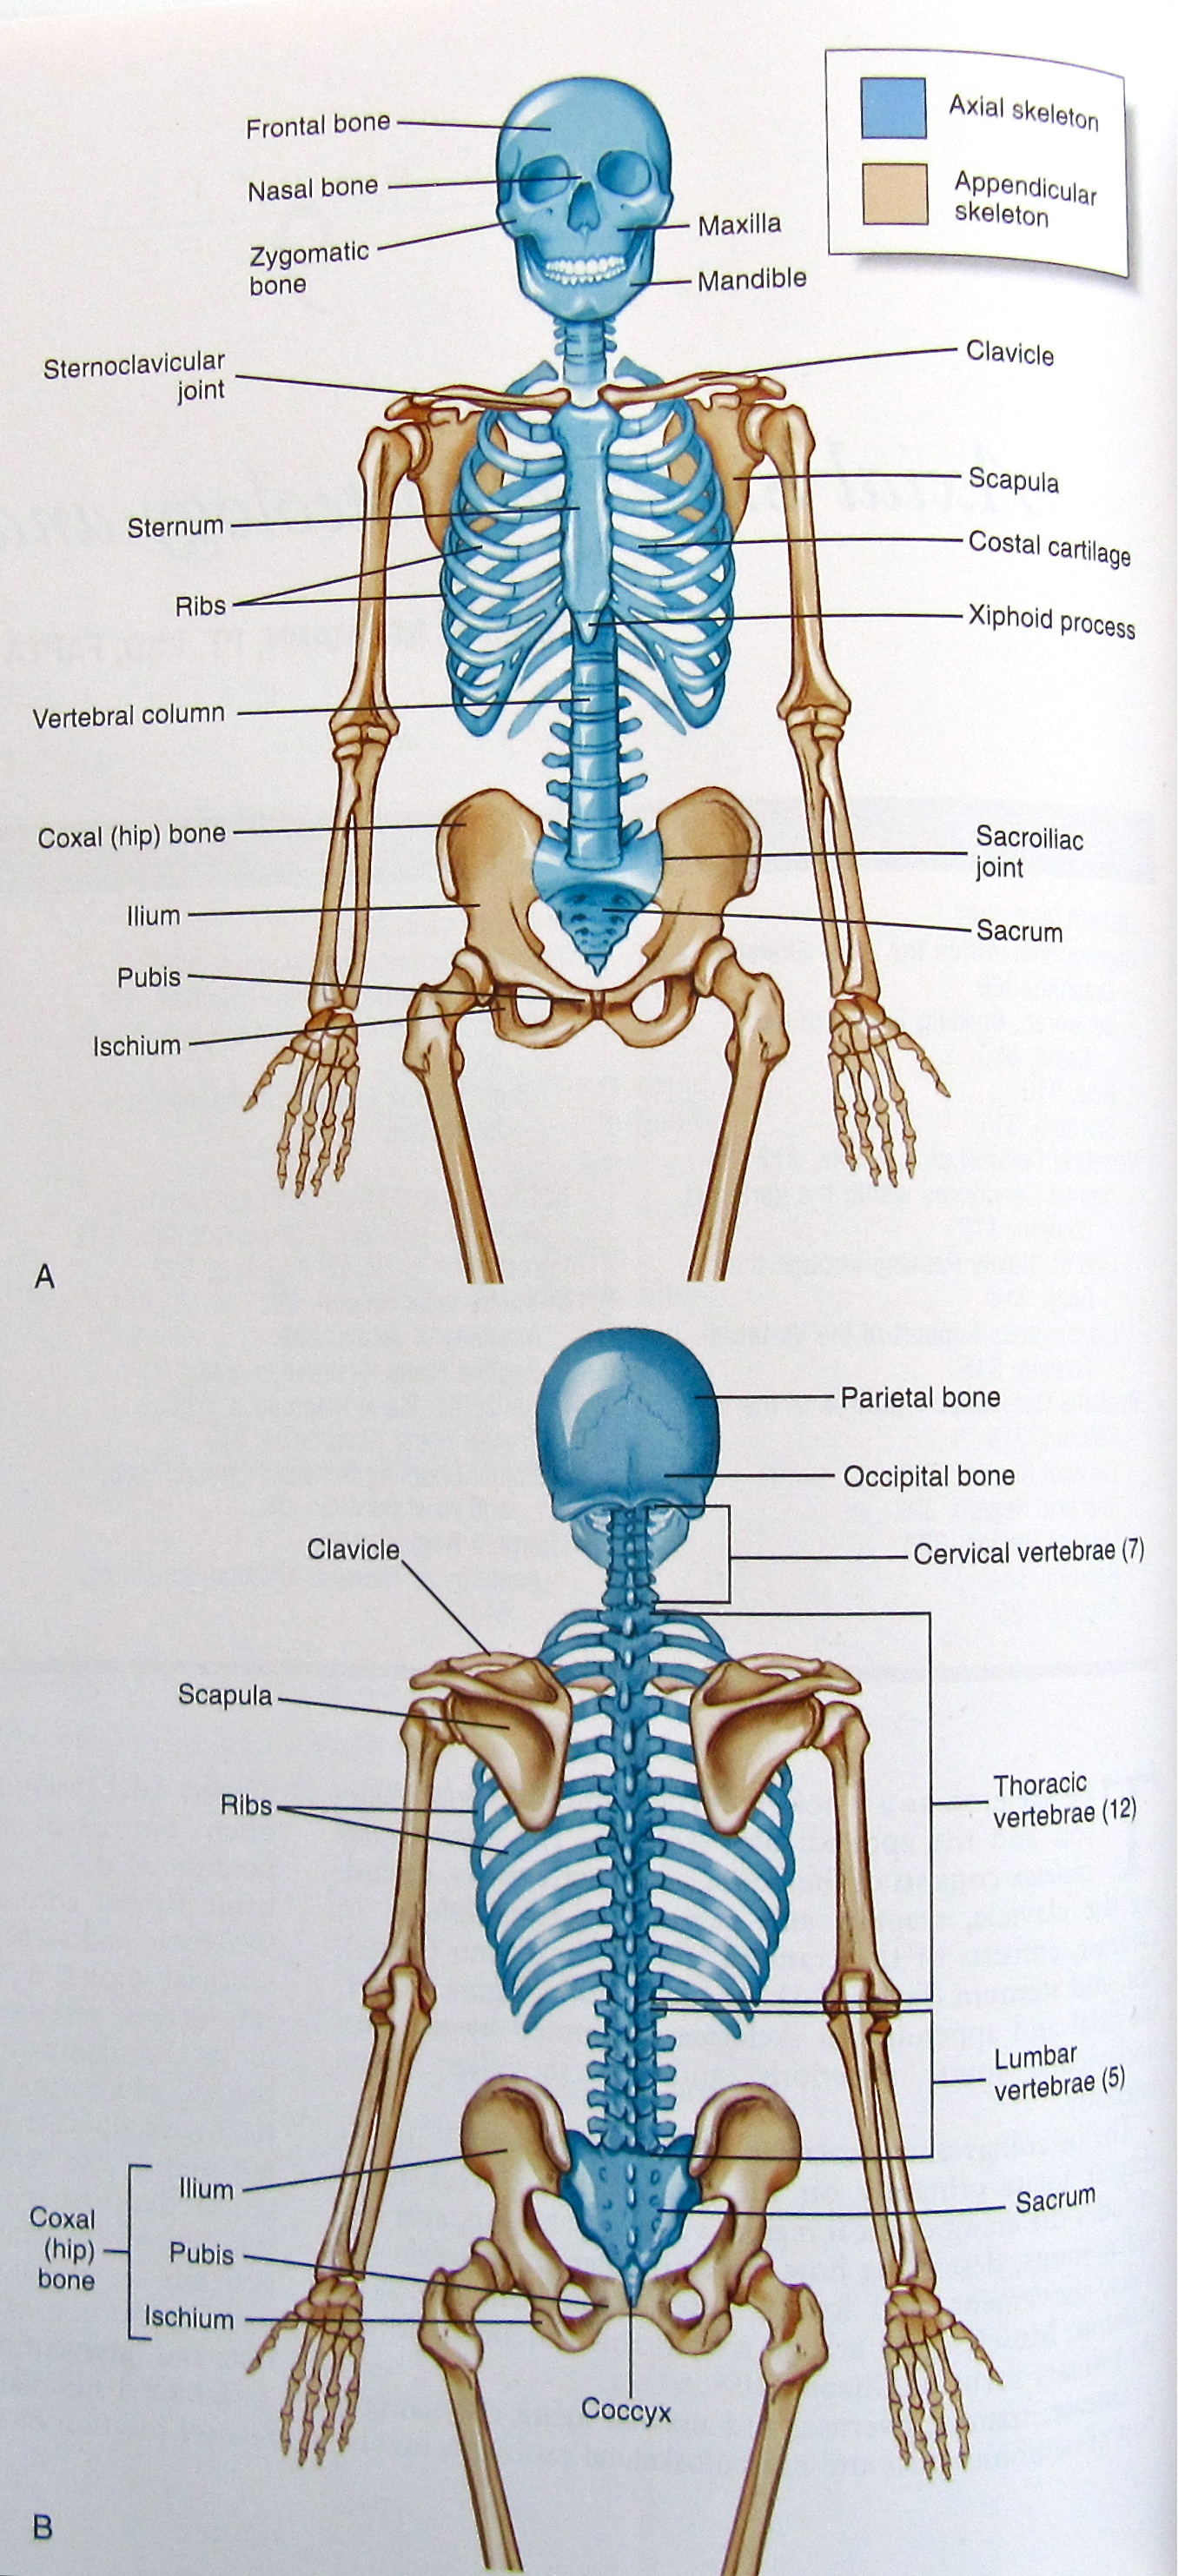 identify all indicated bones in the diagram of the articulated skeleton